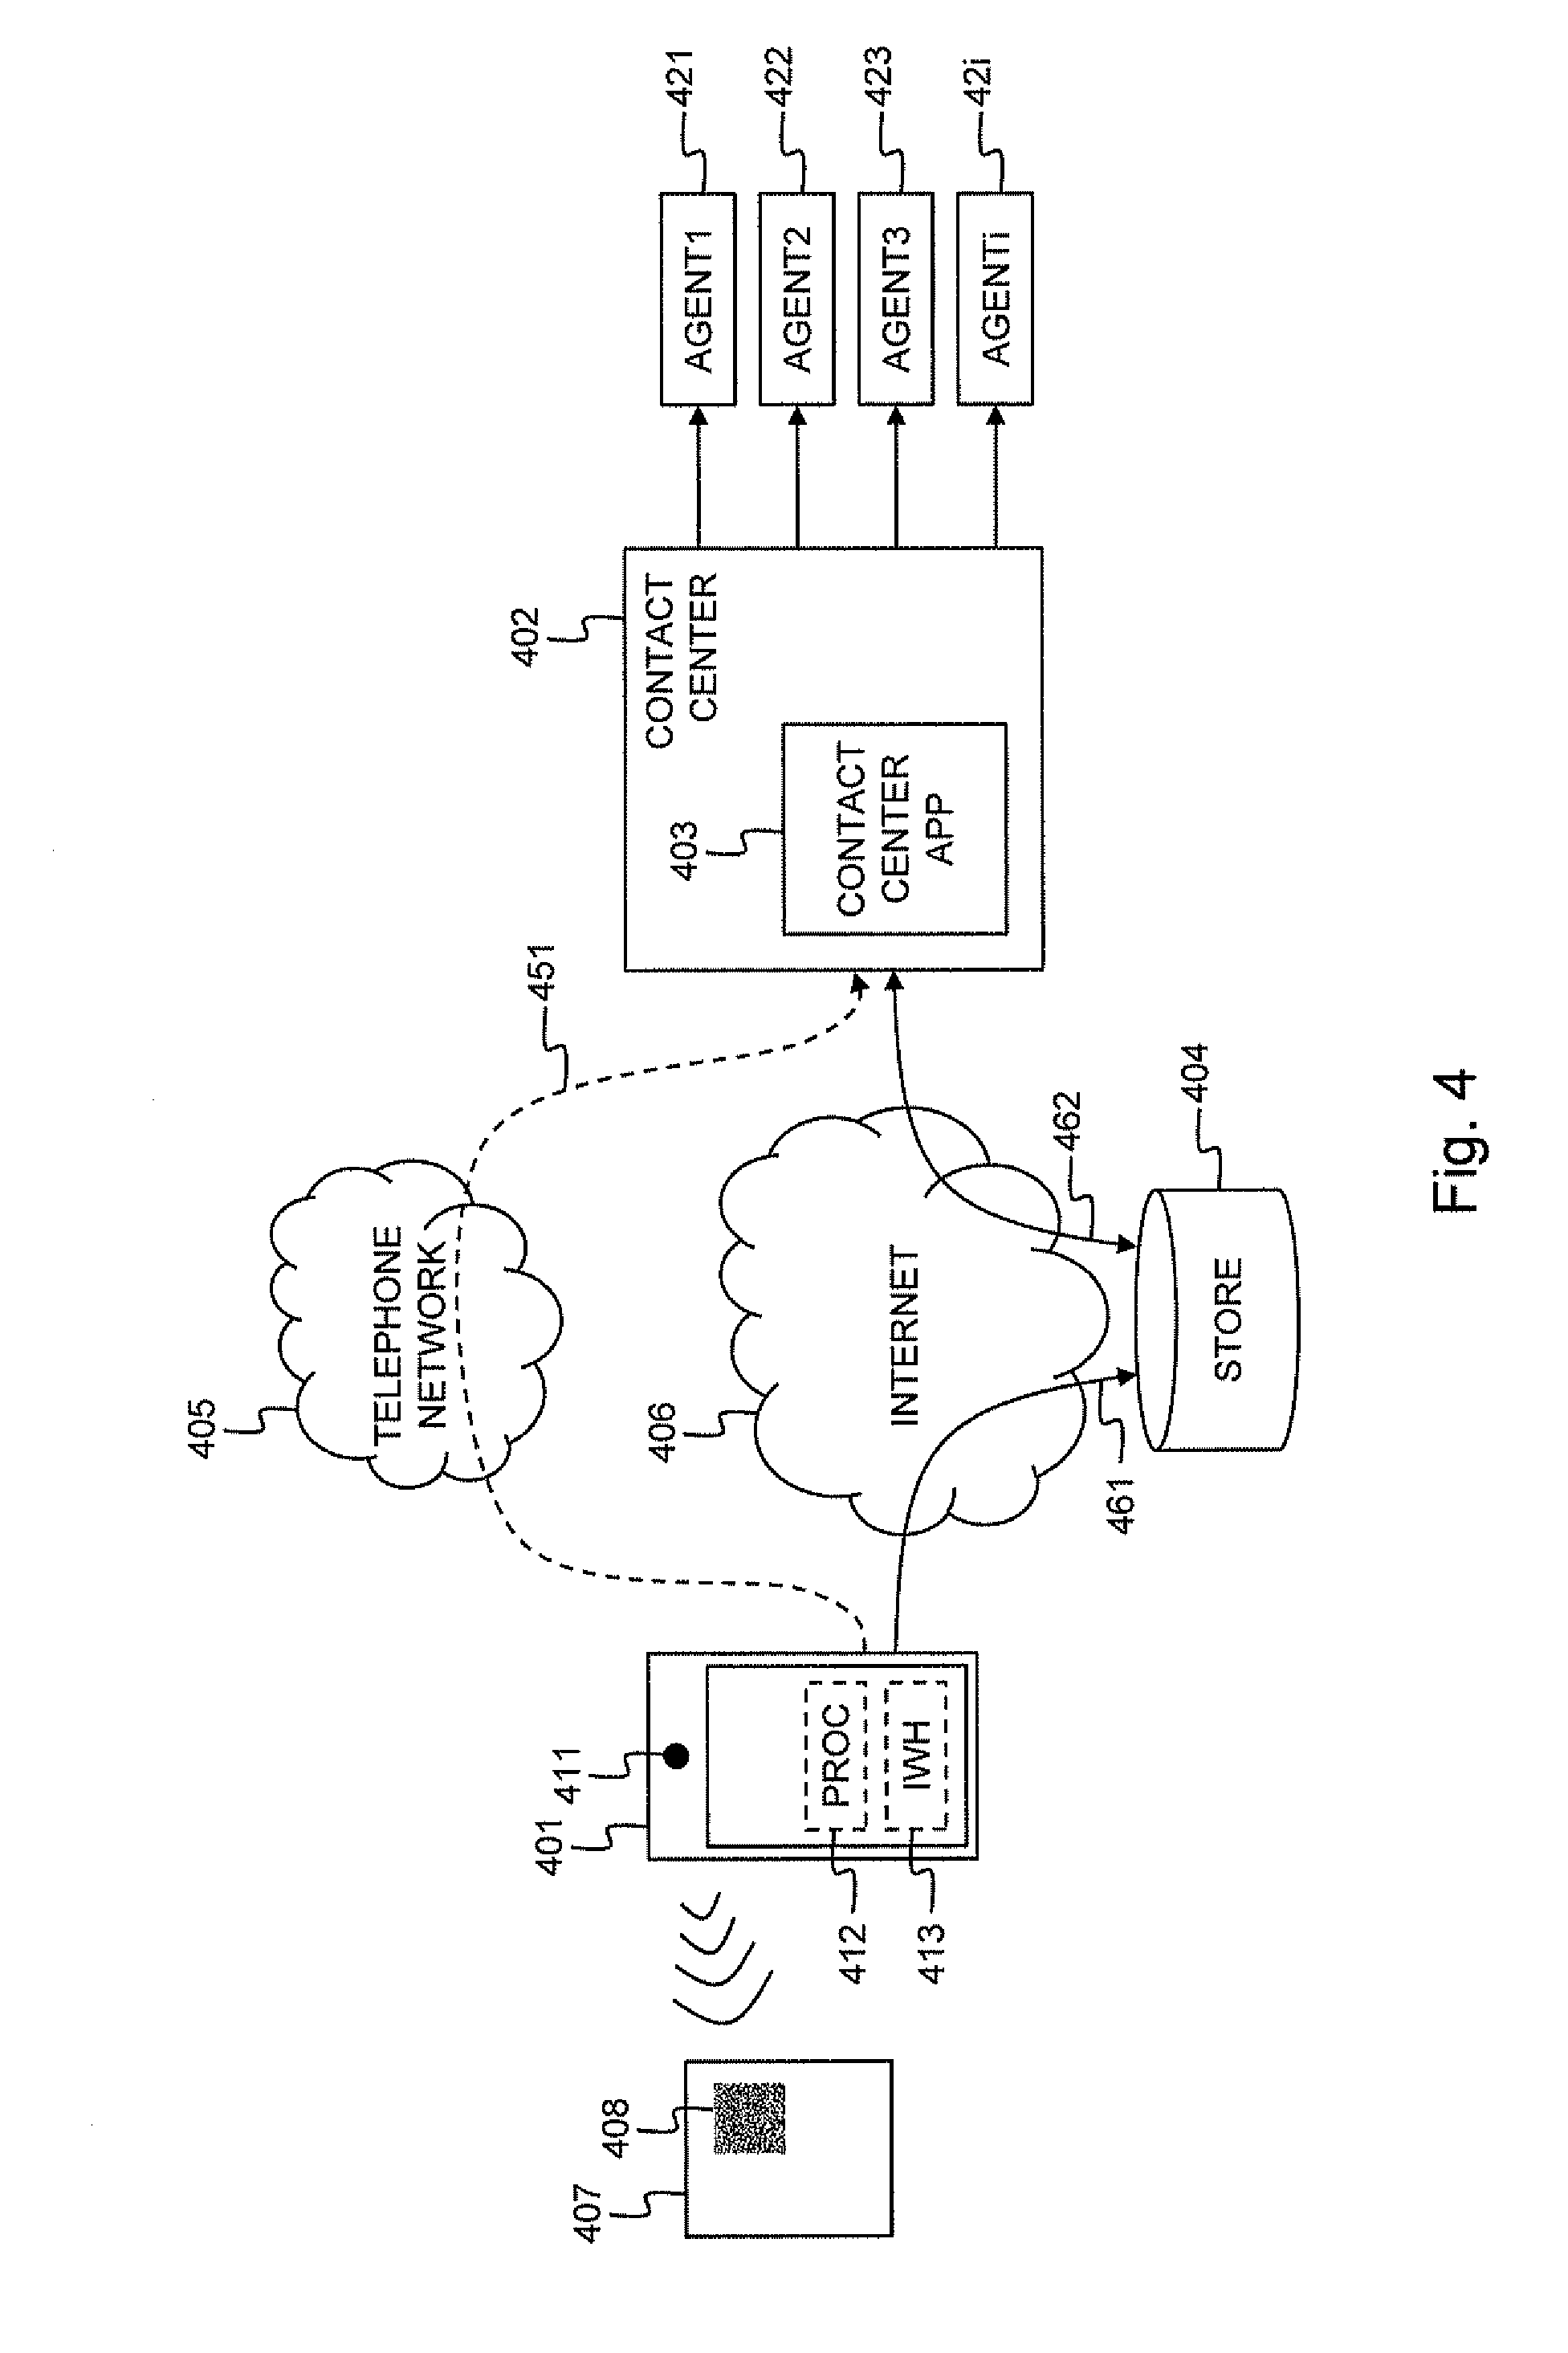 Method and system to establish a call to a contact center